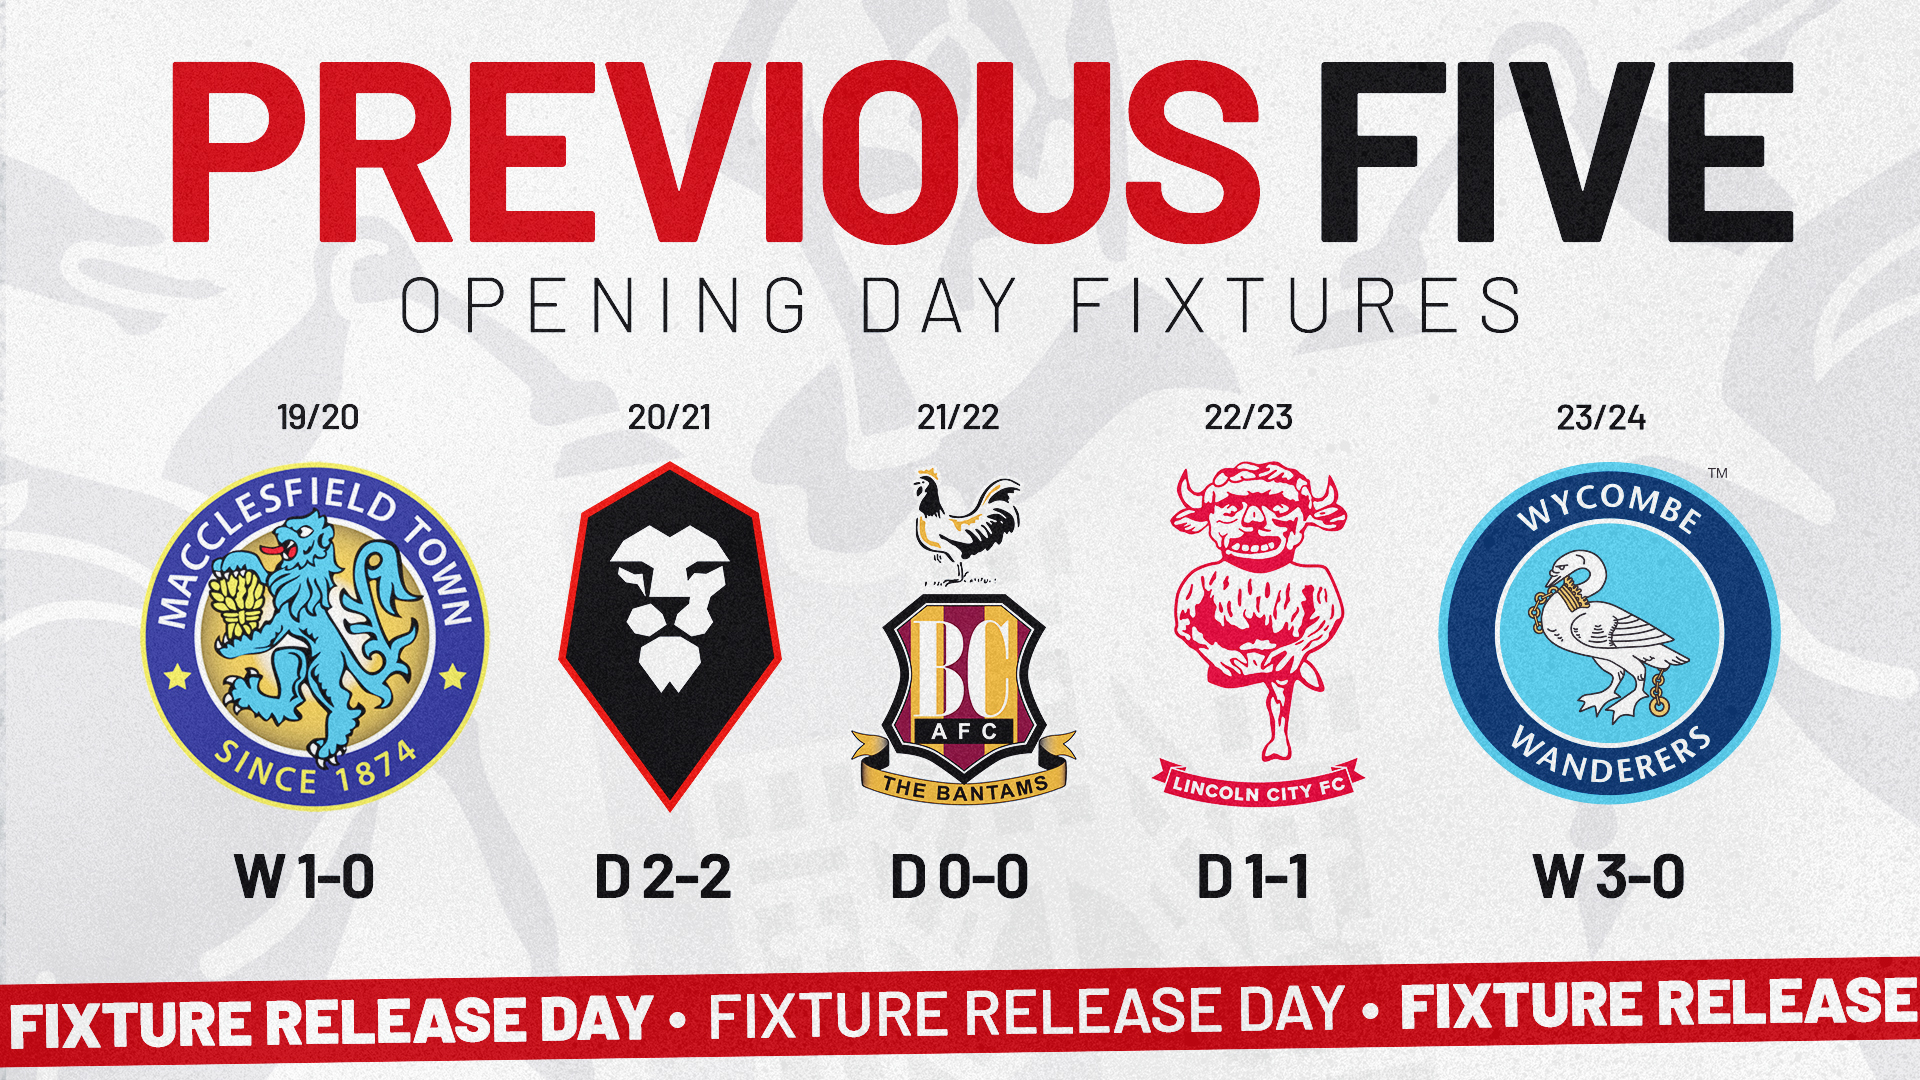 An image showing City's previous five matches on the opening day of the season